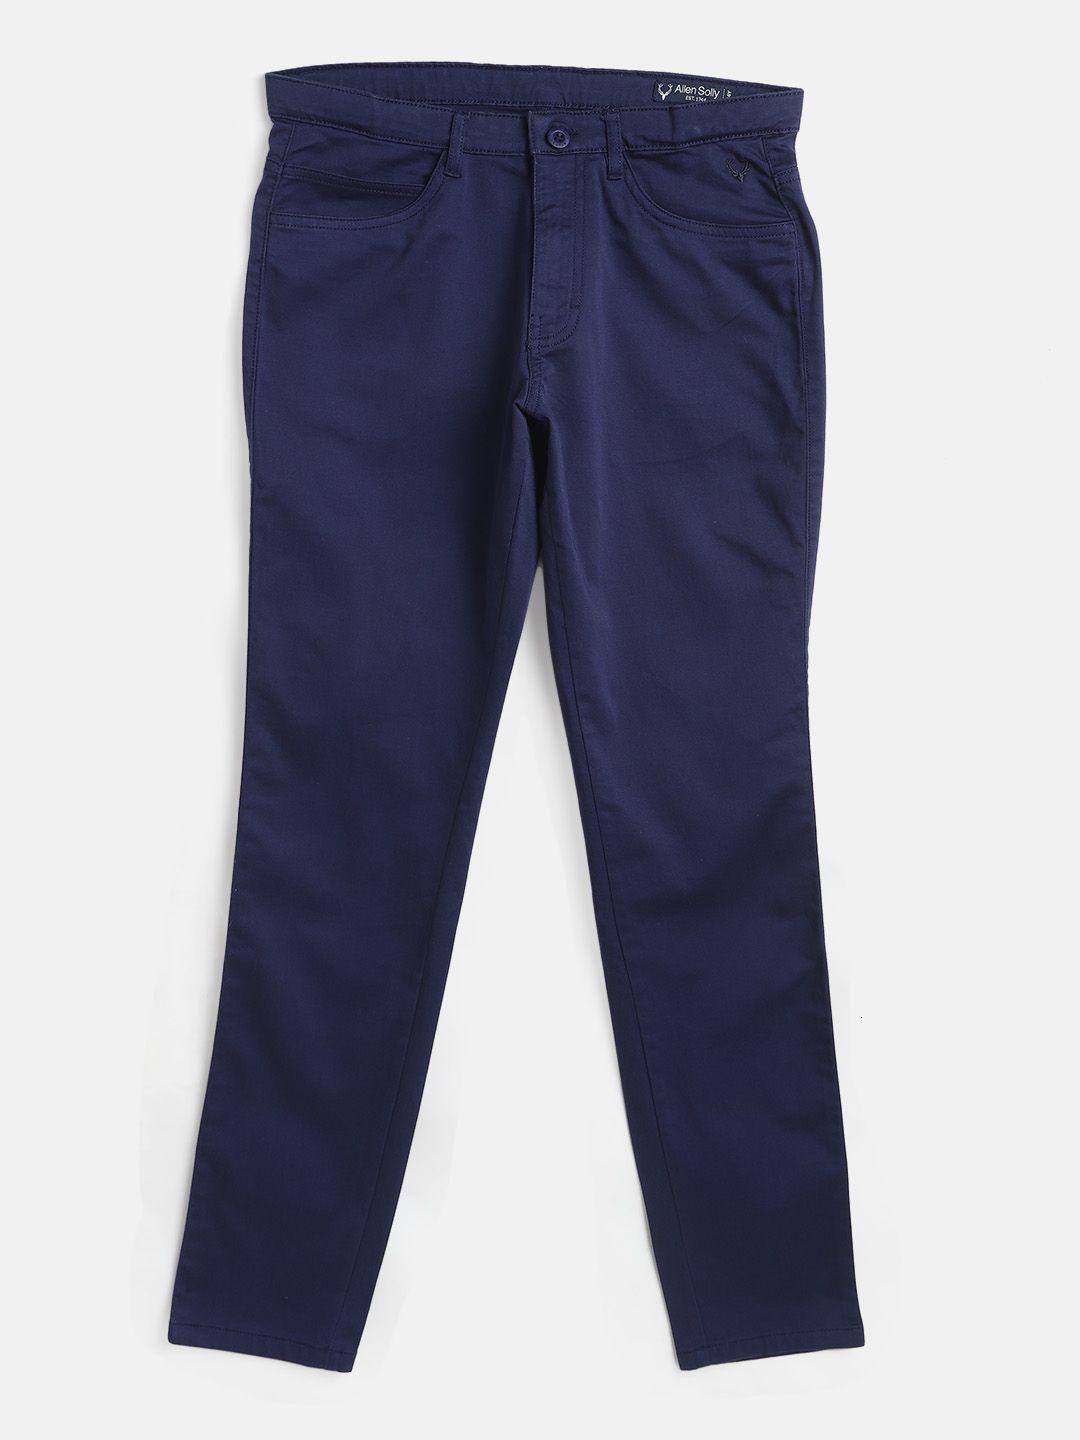 allen solly junior boys navy blue solid cotton slim fit trousers